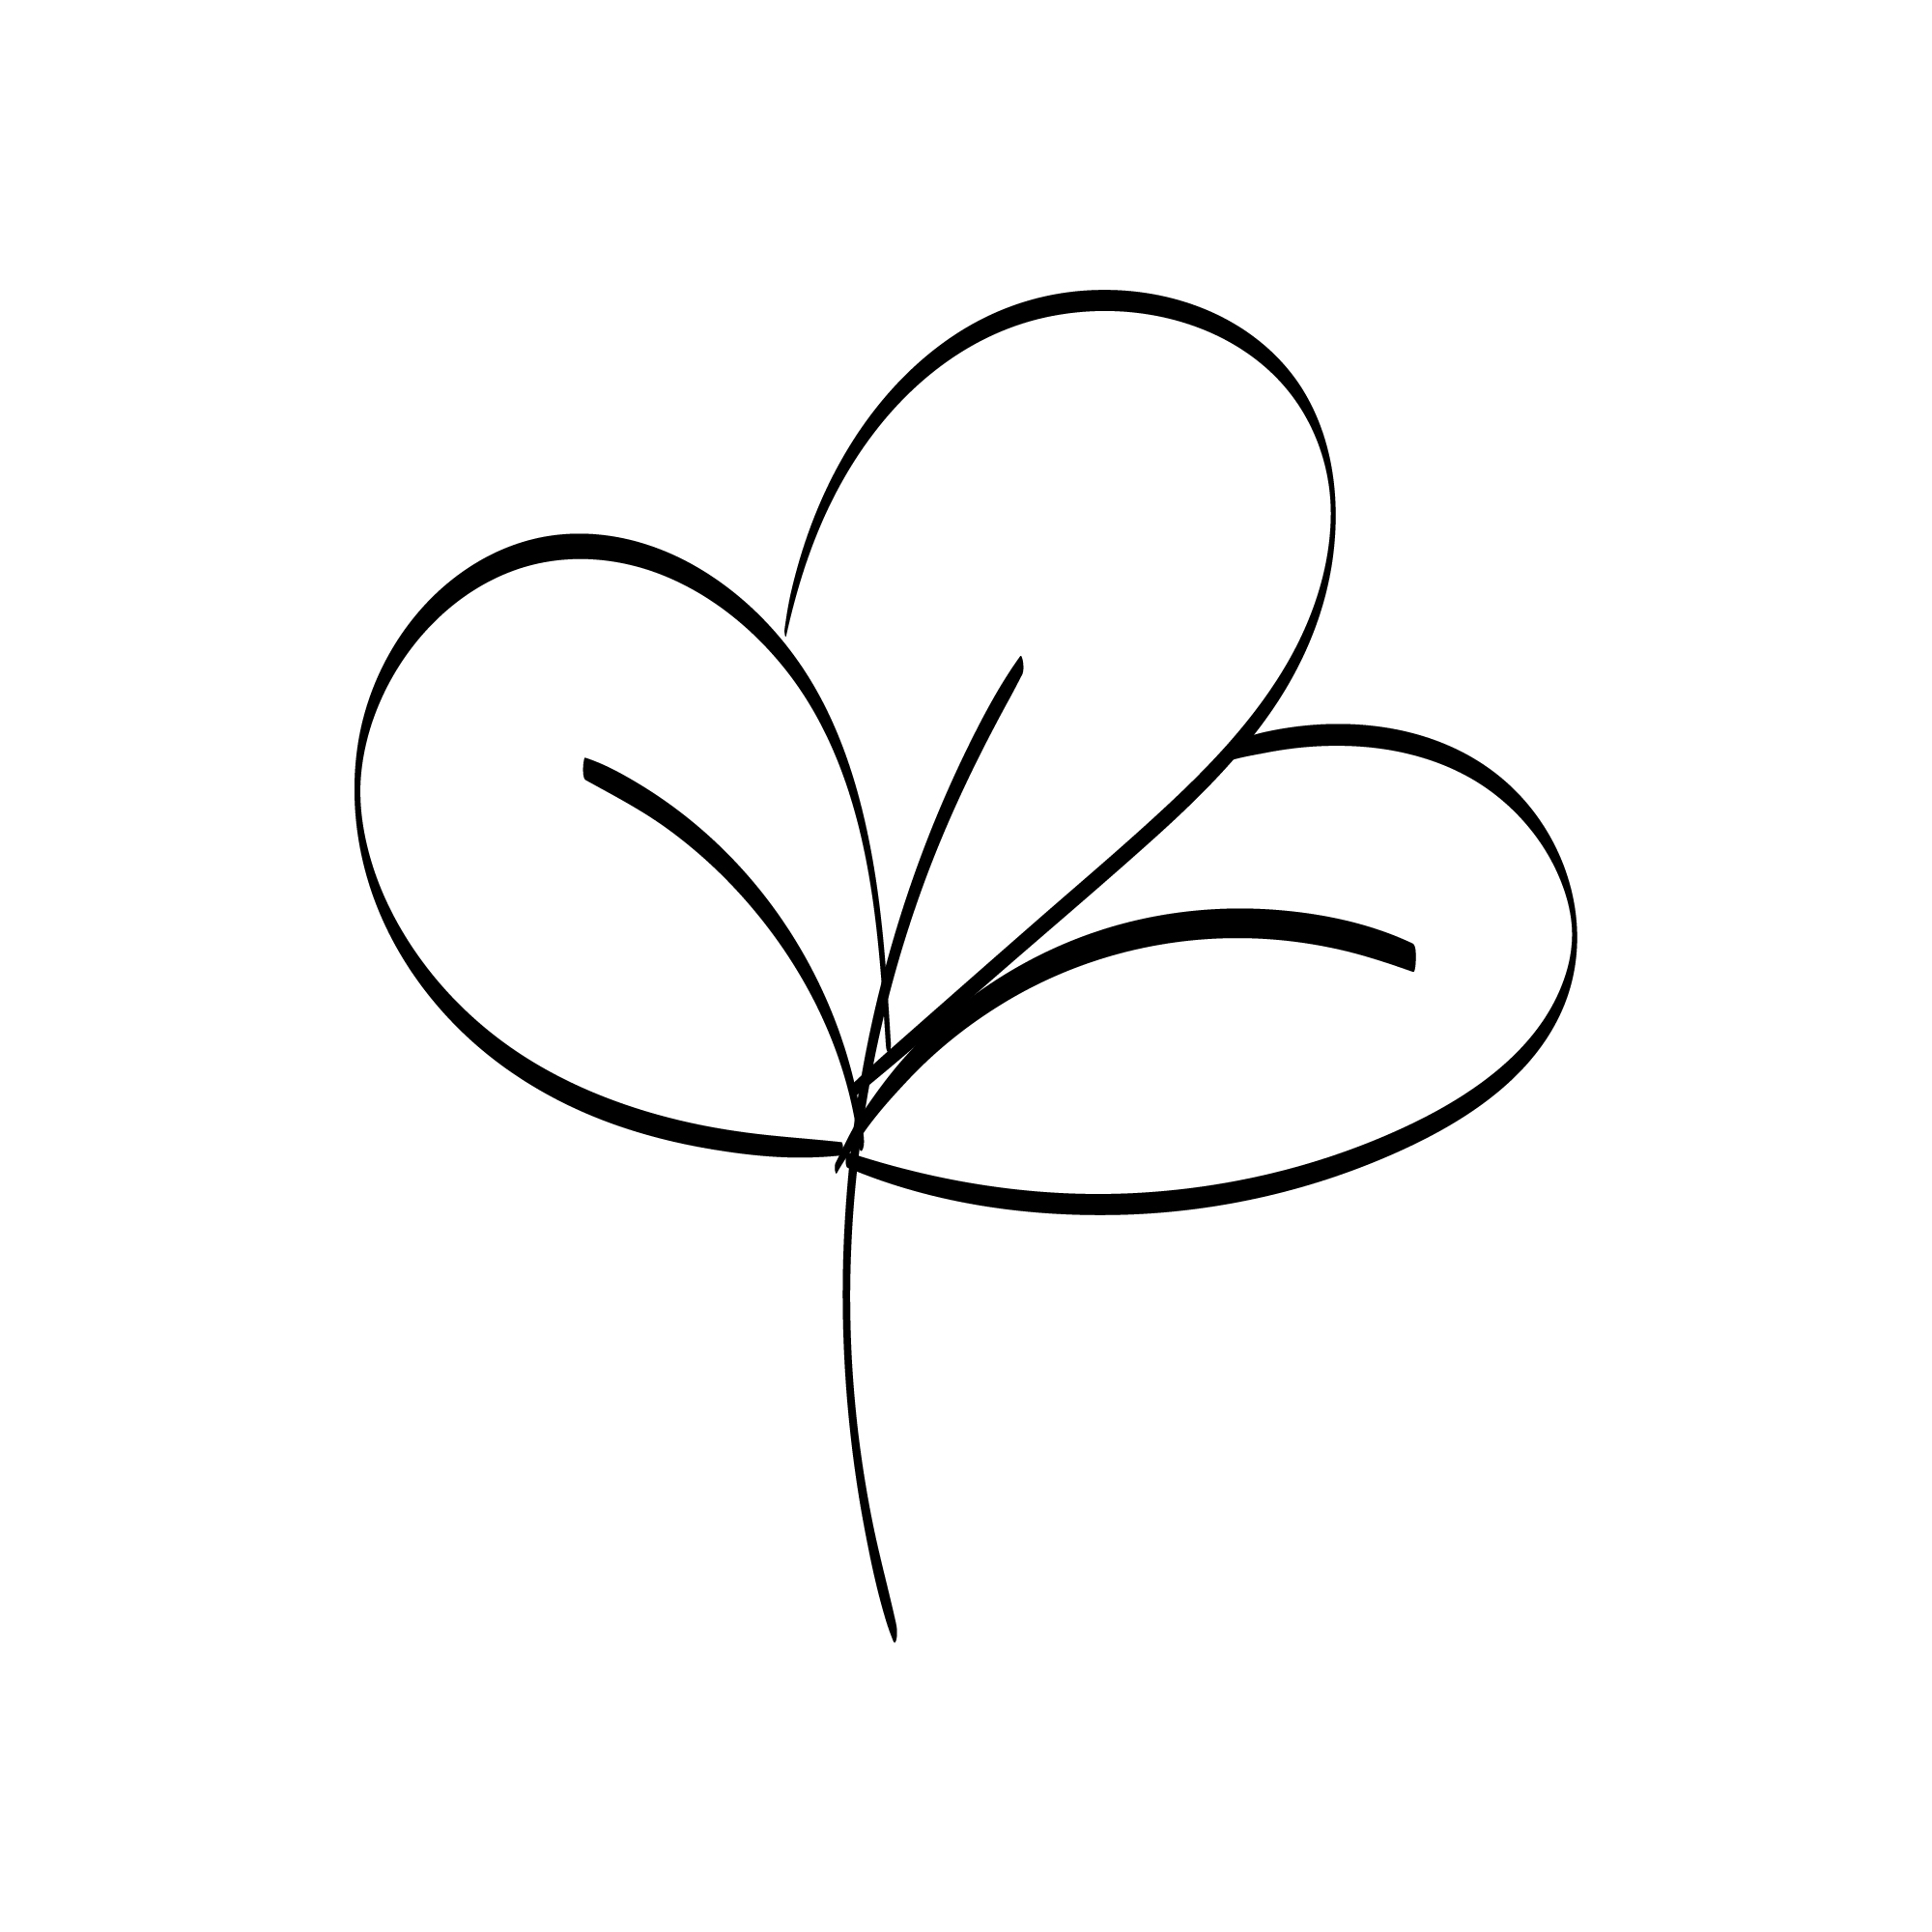 Flower Art Graphics Drawing with Line-art Preview image.